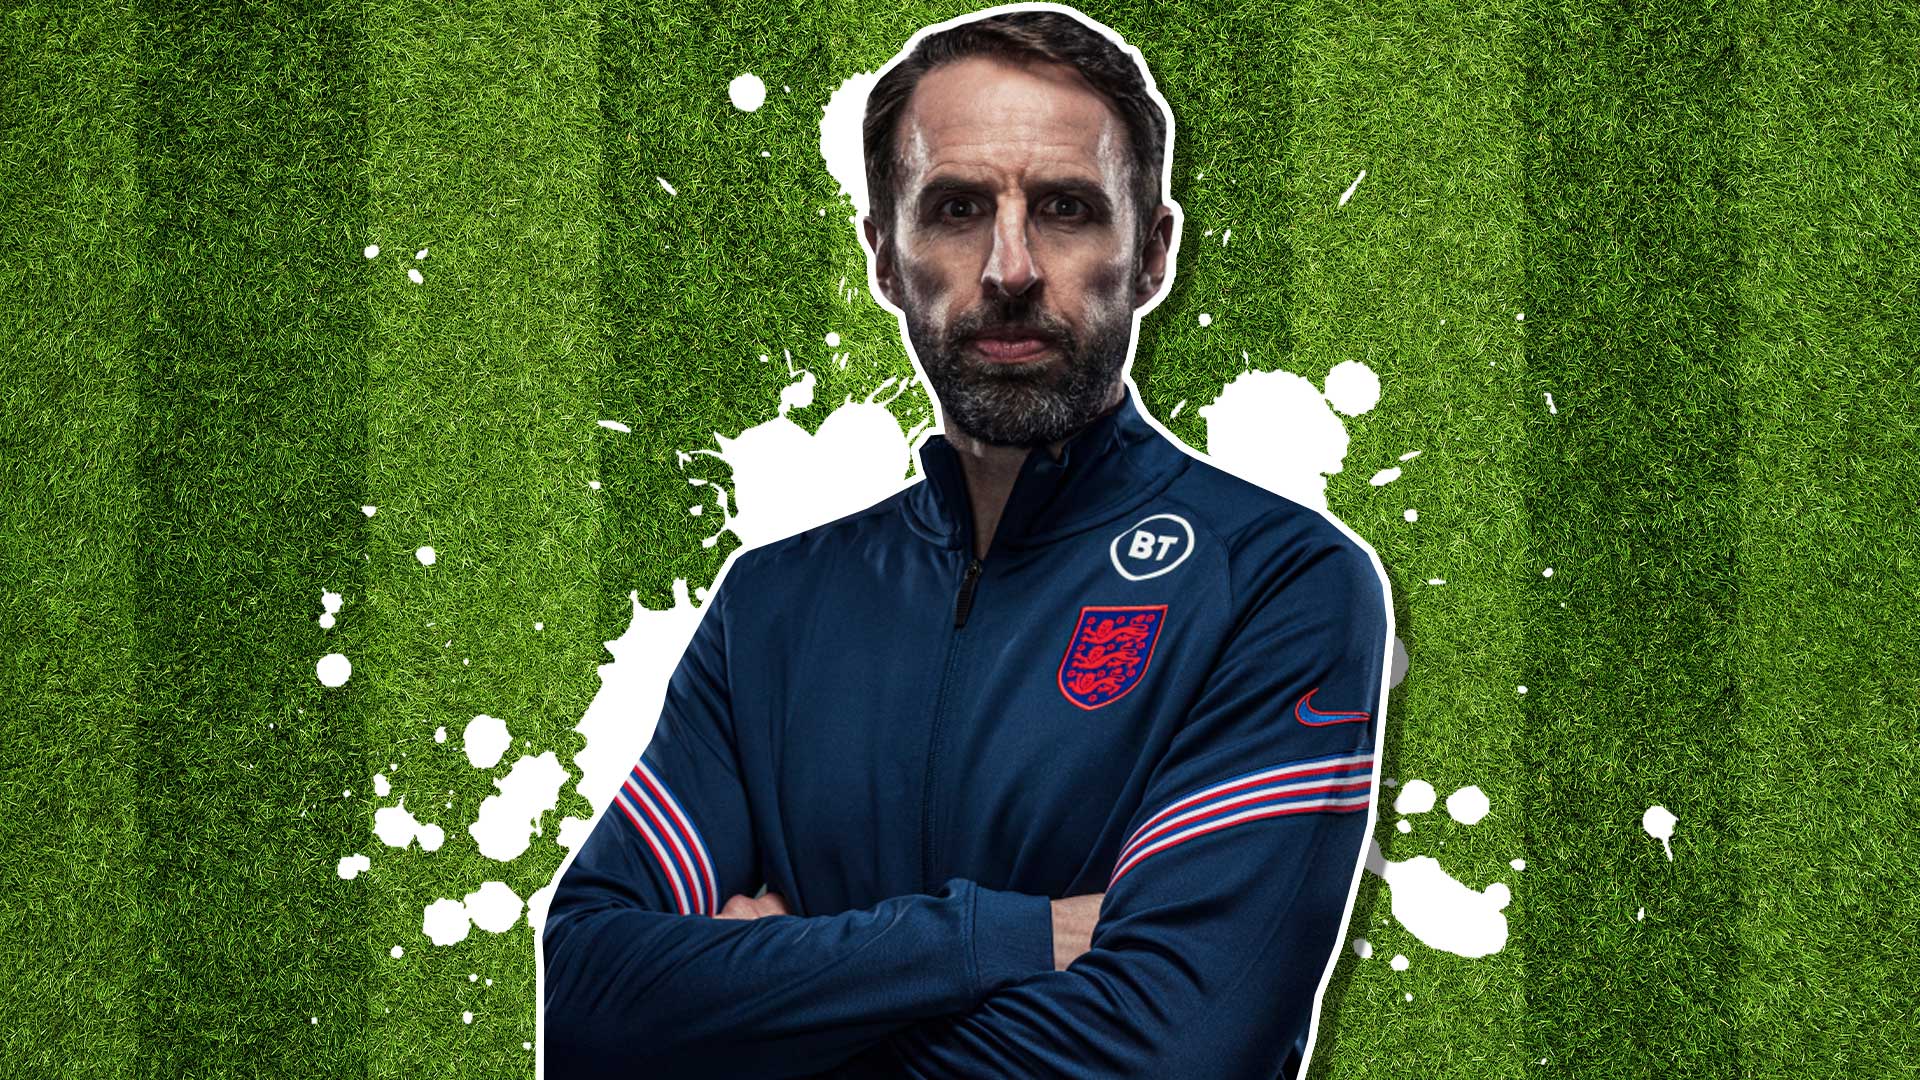 The current England manager